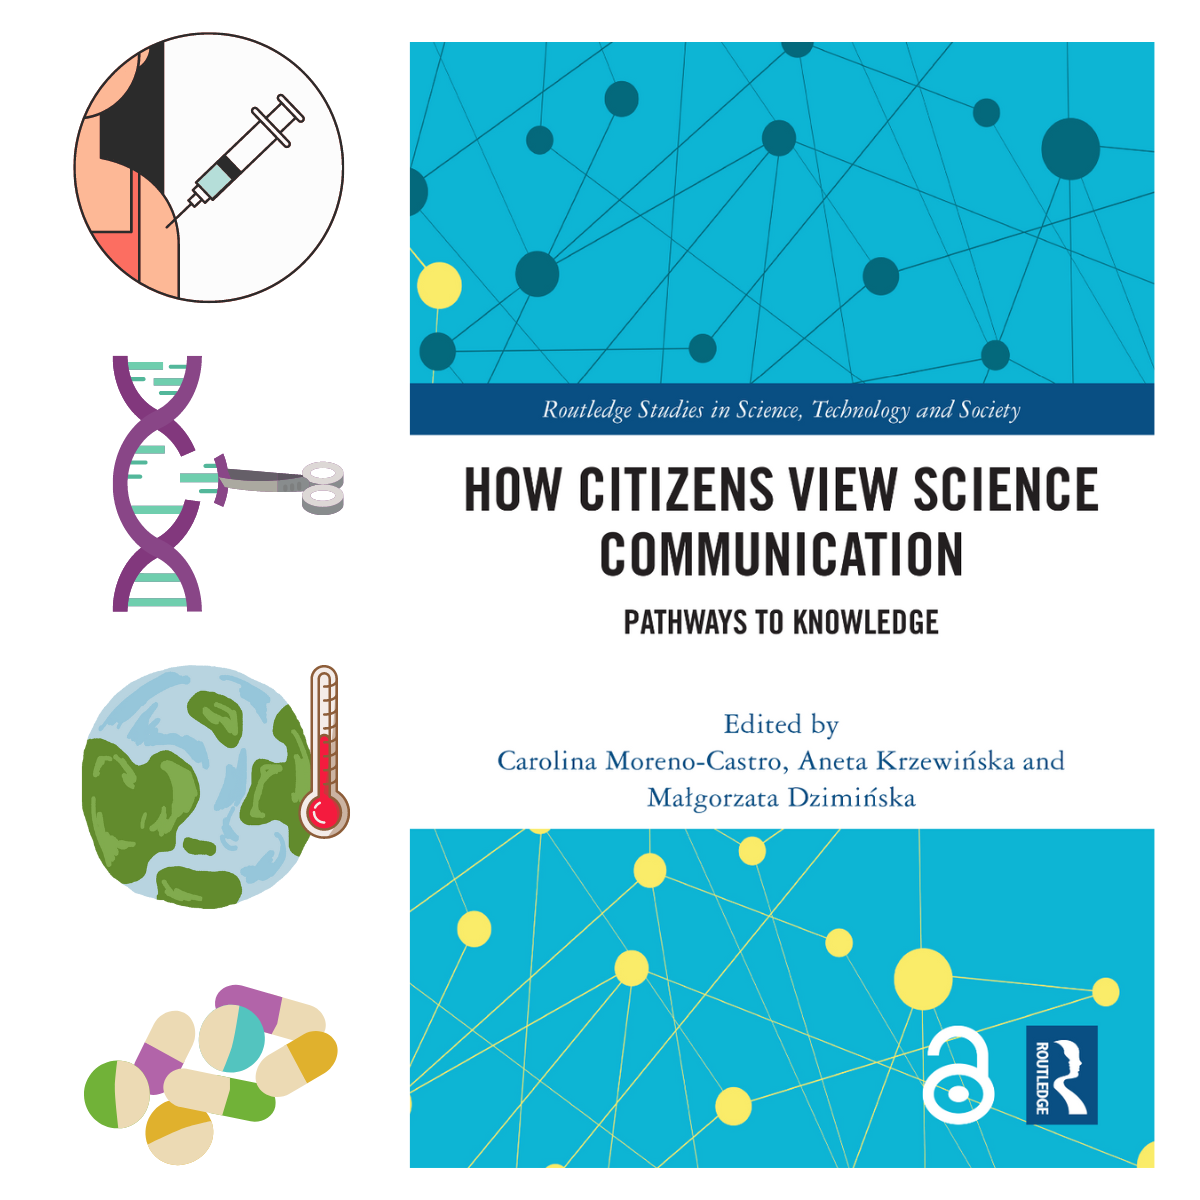 How Citizens View Science Communication: Pathways to Knowledge is available in open access!